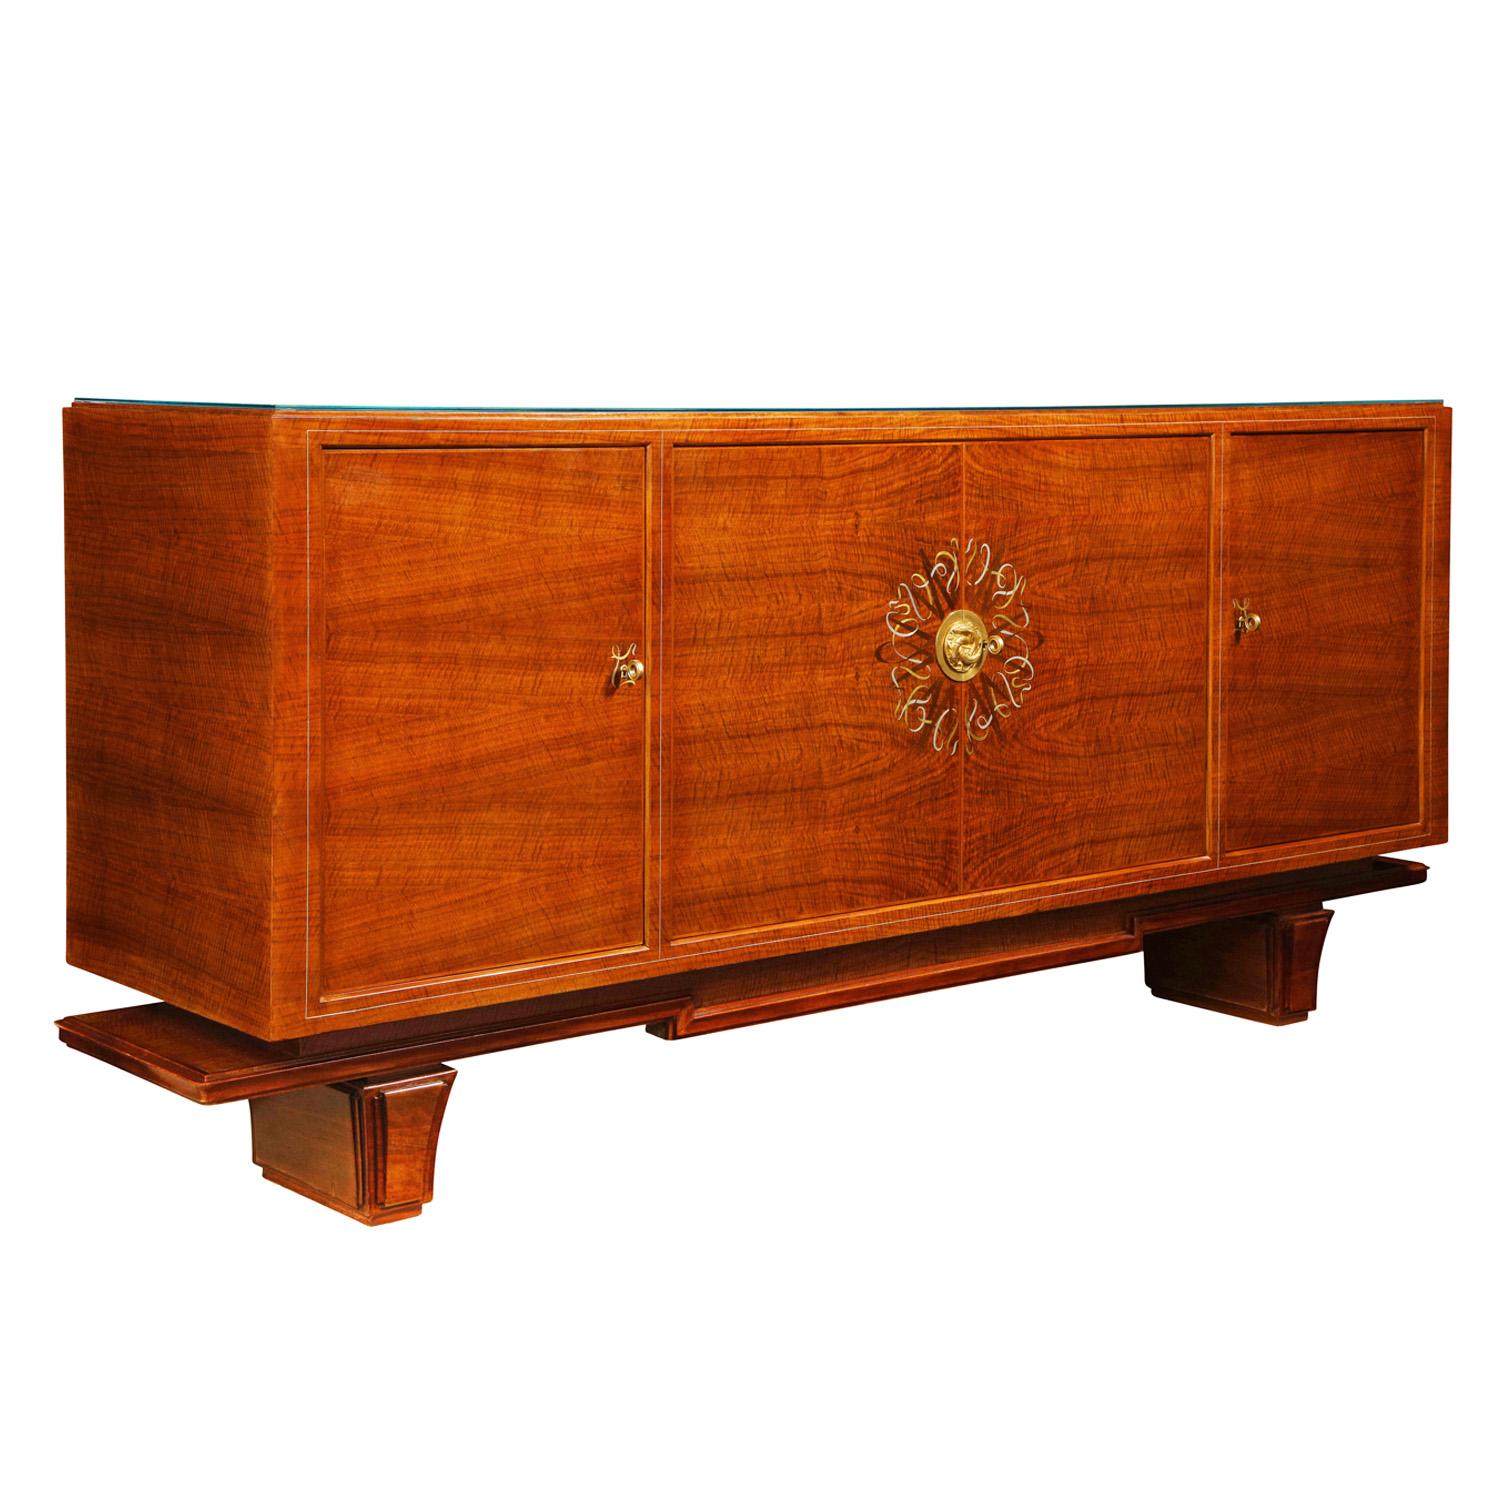 Extraordinary 4 door Art Deco credenza in book-matched rosewood with ribbon inlays in pewter and bronze with solid brass artisan center medallion of 3 swimming dolphins and delicate mother-of-pearl inlays around the outside of the front by